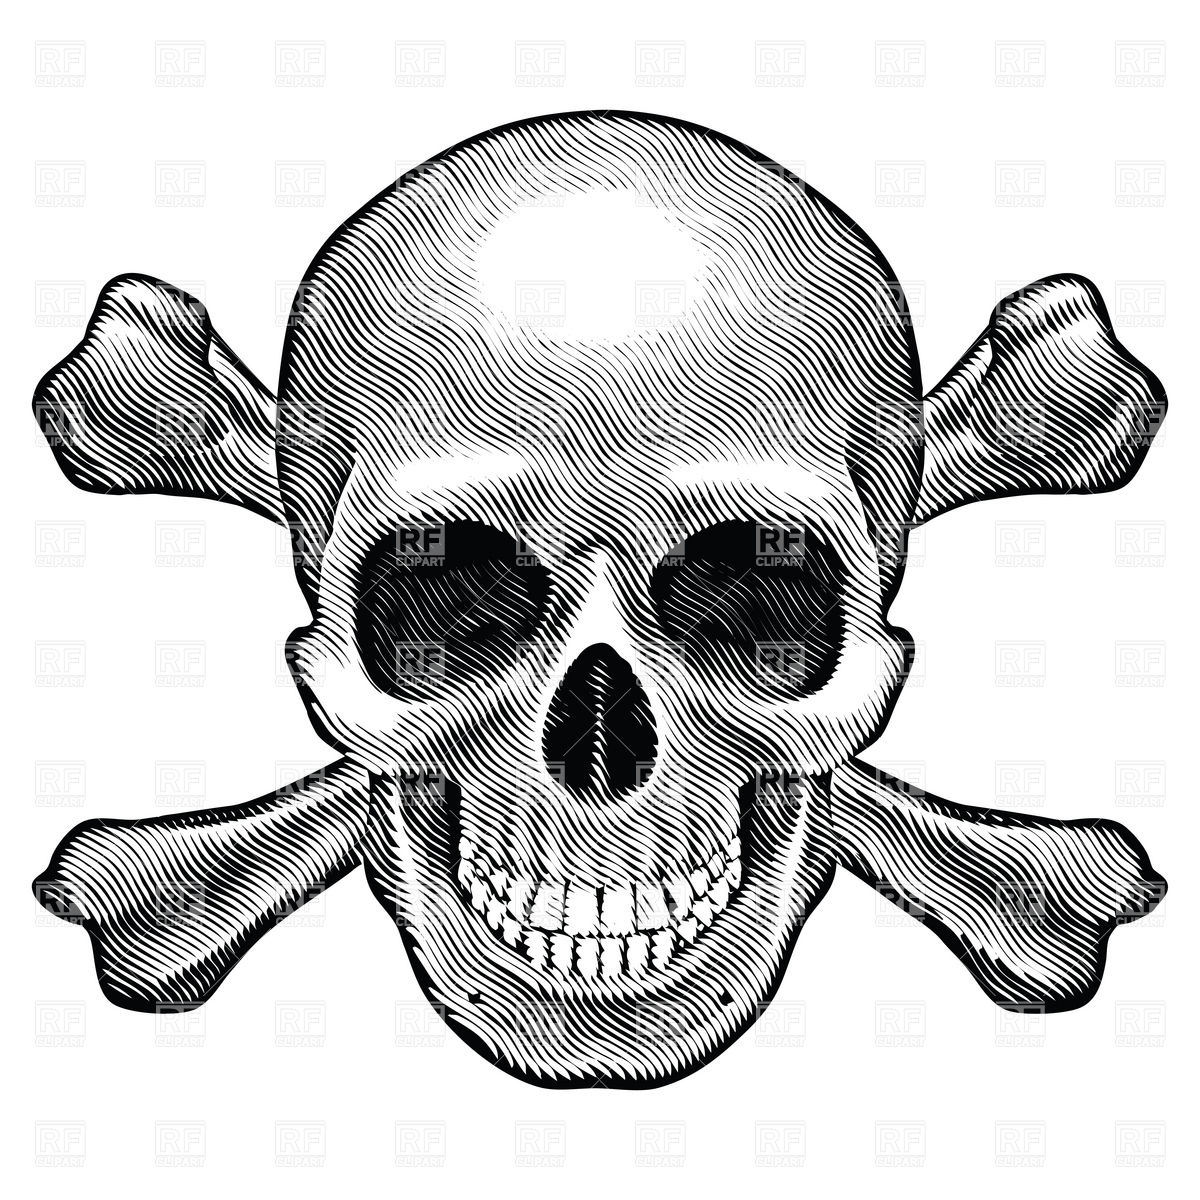 Crossbones And Skull   Sketch Style 7364 Download Royalty Free